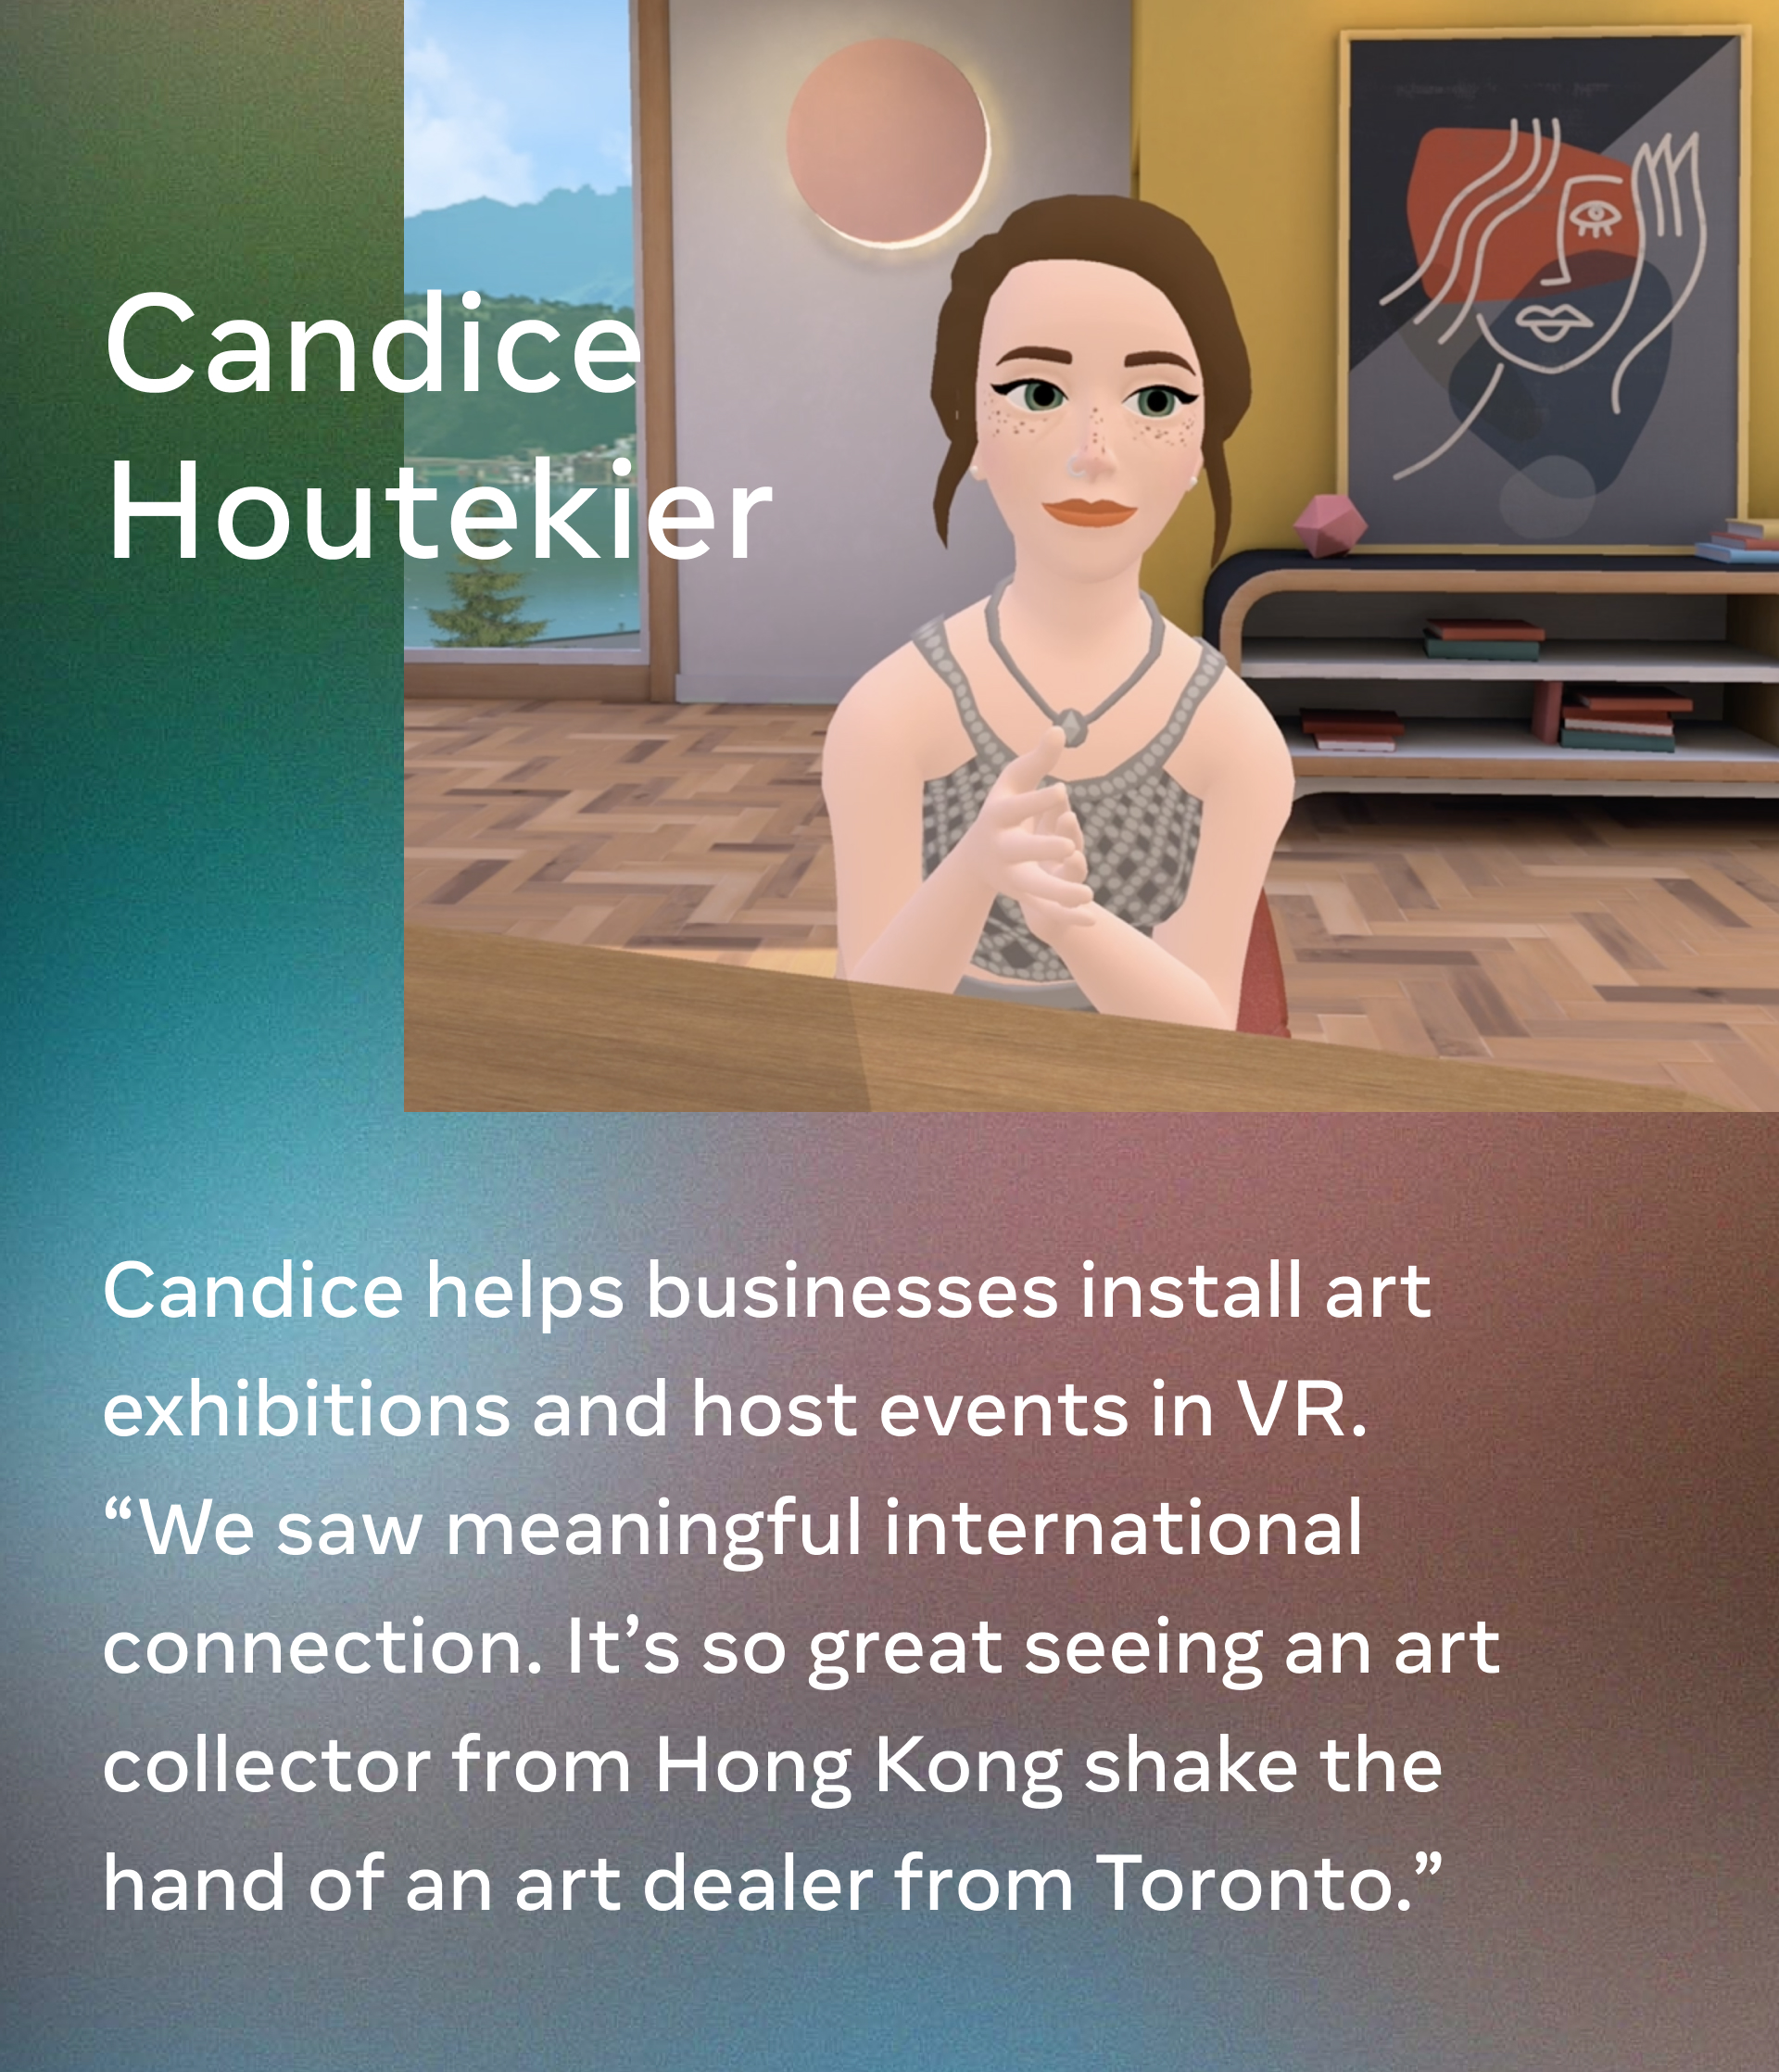 Candice Houtekier. Candice helps businesses install art exhibitions and host events in VR. “We saw meaningful international connection. It’s so great seeing an art collector from Hong Kong shake the hand of an art dealer from Toronto.”